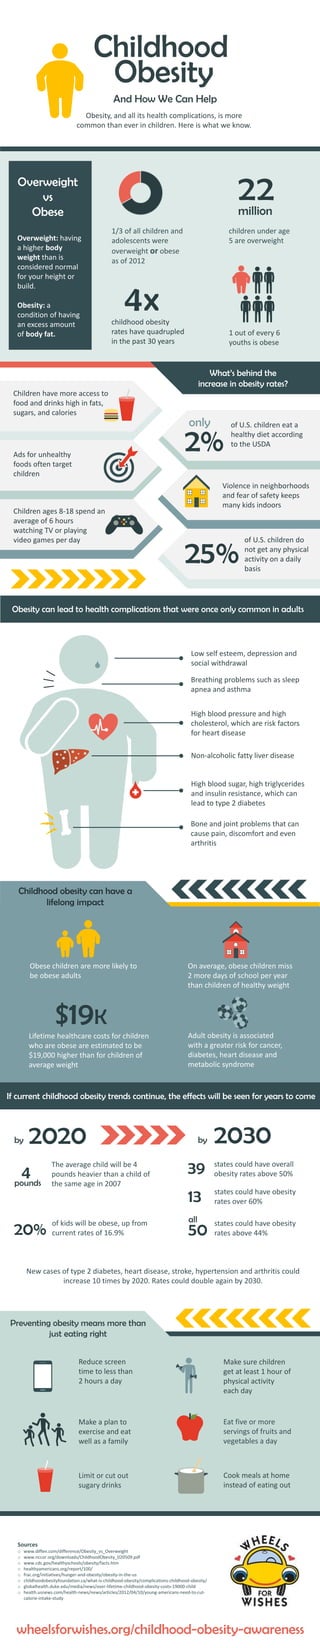 Childhood
Obesity, and all its health complications, is more
common than ever in children. Here is what we know.
Obesity can lead to health complications that were once only common in adults
And How We Can Help
1/3 of all children and
adolescents were
overweight or obese
as of 2012
4xchildhood obesity
rates have quadrupled
in the past 30 years
Sources
o www.diffen.com/difference/Obesity_vs_Overweight
o www.nccor.org/downloads/ChildhoodObesity_020509.pdf
o www.cdc.gov/healthyschools/obesity/facts.htm
o healthyamericans.org/report/100/
o frac.org/initiatives/hunger-and-obesity/obesity-in-the-us
o childhoodobesityfoundation.ca/what-is-childhood-obesity/complications-childhood-obesity/
o globalhealth.duke.edu/media/news/over-lifetime-childhood-obesity-costs-19000-child
o health.usnews.com/health-news/news/articles/2012/04/10/young-americans-need-to-cut-
calorie-intake-study
Obesity
1 out of every 6
youths is obese
Preventing obesity means more than
just eating right
Make sure children
get at least 1 hour of
physical activity
each day
Reduce screen
time to less than
2 hours a day
Cook meals at home
instead of eating out
Make a plan to
exercise and eat
well as a family
22million
children under age
5 are overweightOverweight: having
a higher body
weight than is
considered normal
for your height or
build.
Obesity: a
condition of having
an excess amount
of body fat.
Overweight
vs
Obese
Low self esteem, depression and
social withdrawal
High blood pressure and high
cholesterol, which are risk factors
for heart disease
High blood sugar, high triglycerides
and insulin resistance, which can
lead to type 2 diabetes
Breathing problems such as sleep
apnea and asthma
Bone and joint problems that can
cause pain, discomfort and even
arthritis
Non-alcoholic fatty liver disease
Limit or cut out
sugary drinks
Eat five or more
servings of fruits and
vegetables a day
What’s behind the
increase in obesity rates?
Ads for unhealthy
foods often target
children
Children have more access to
food and drinks high in fats,
sugars, and calories
Children ages 8-18 spend an
average of 6 hours
watching TV or playing
video games per day of U.S. children do
not get any physical
activity on a daily
basis
Violence in neighborhoods
and fear of safety keeps
many kids indoors
25%
of U.S. children eat a
healthy diet according
to the USDA
only
2%
$19K
Lifetime healthcare costs for children
who are obese are estimated to be
$19,000 higher than for children of
average weight
On average, obese children miss
2 more days of school per year
than children of healthy weight
Obese children are more likely to
be obese adults
Adult obesity is associated
with a greater risk for cancer,
diabetes, heart disease and
metabolic syndrome
Childhood obesity can have a
lifelong impact
If current childhood obesity trends continue, the effects will be seen for years to come
2020 2030
The average child will be 4
pounds heavier than a child of
the same age in 2007
states could have overall
obesity rates above 50%
New cases of type 2 diabetes, heart disease, stroke, hypertension and arthritis could
increase 10 times by 2020. Rates could double again by 2030.
by by
39
states could have obesity
rates over 60%
states could have obesity
rates above 44%
13
50
all
4pounds
20%
of kids will be obese, up from
current rates of 16.9%
wheelsforwishes.org/childhood-obesity-awareness
 